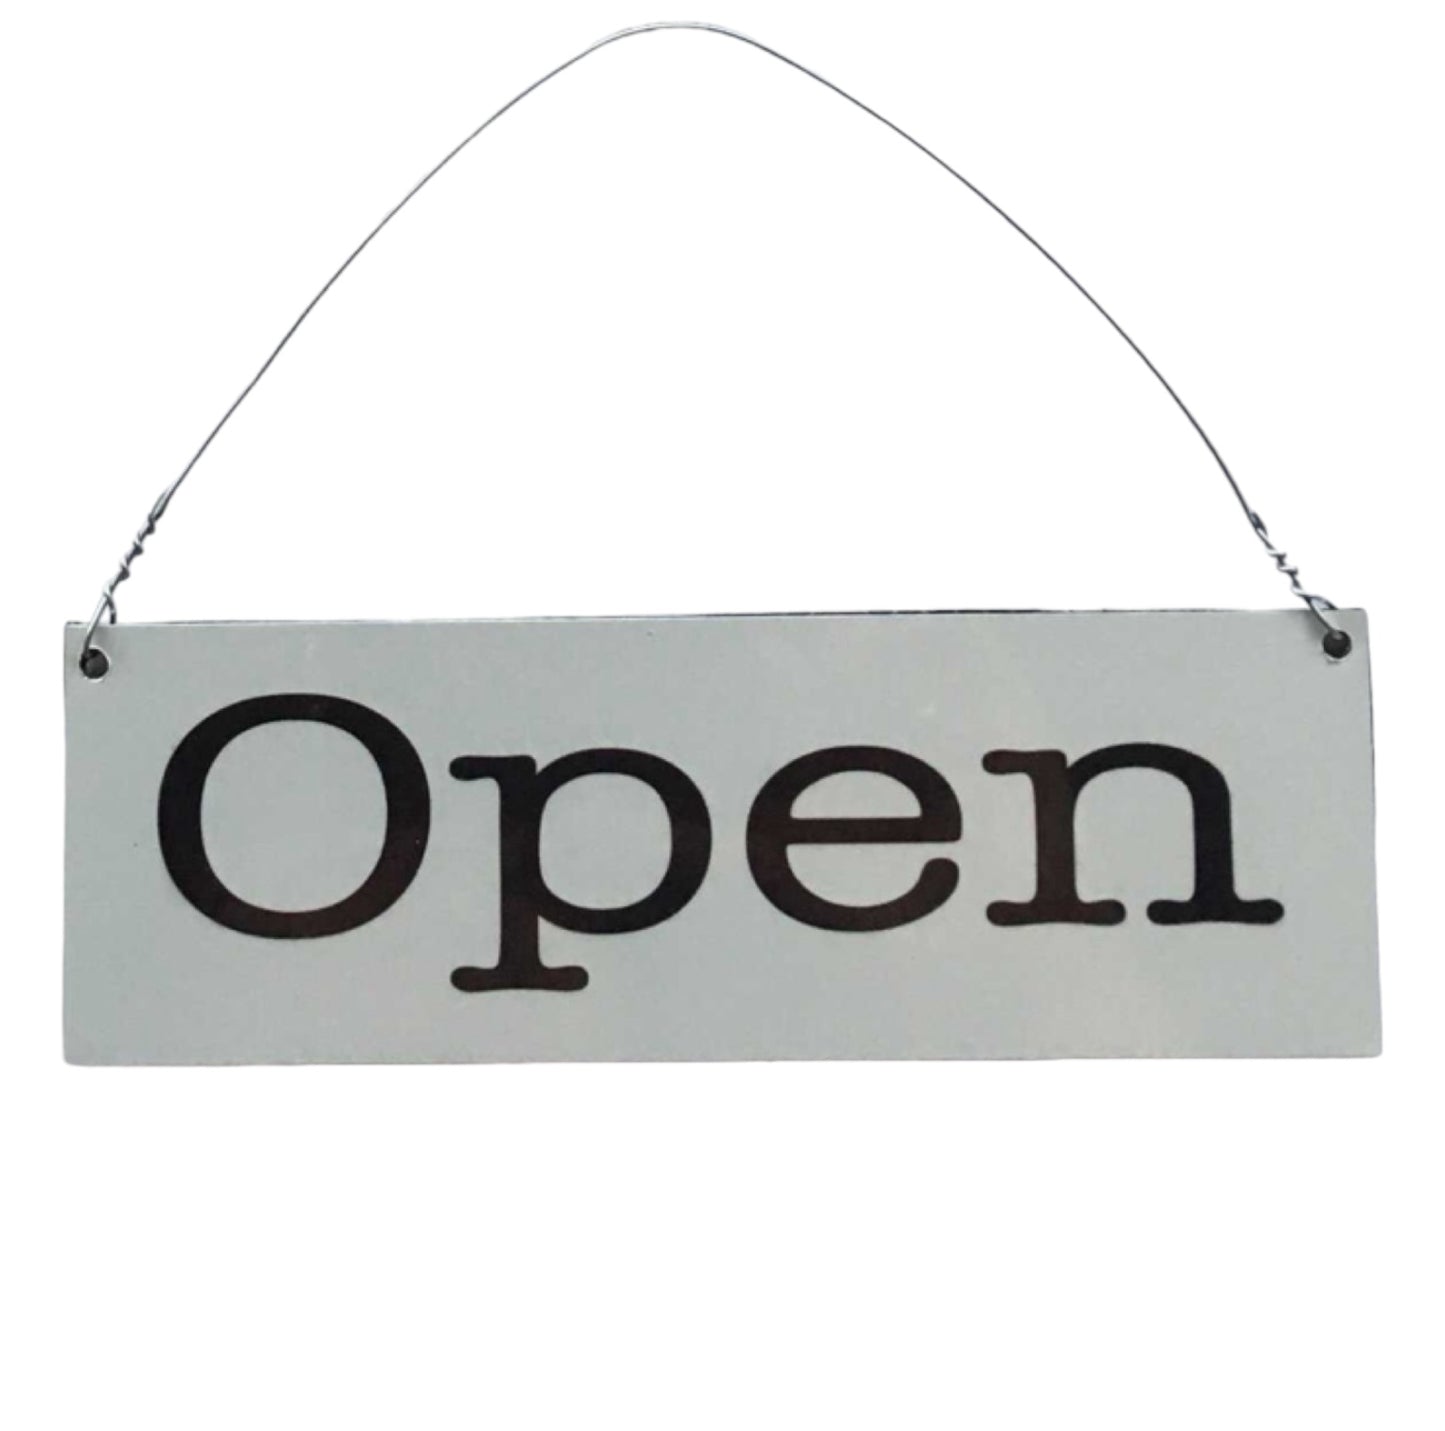 Open Closed White Business Shop Cafe Hanging Sign - The Renmy Store Homewares & Gifts 